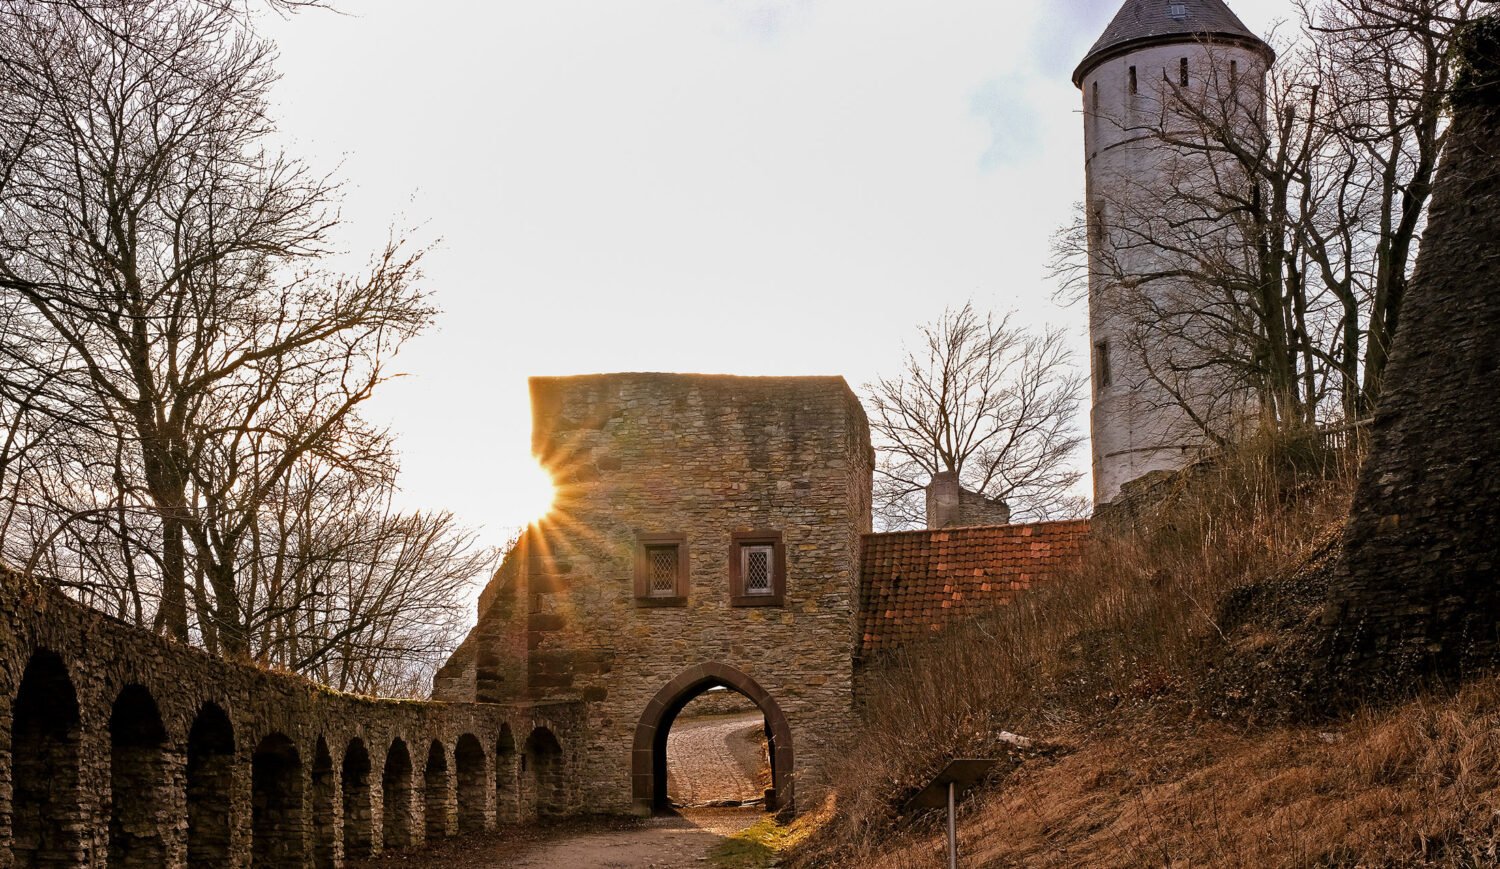 For more than 400 years, Plesse Castle was the residence and seat of power of the Lords of Höckelheim © Göttingen Tourism and Marketing / Mischke